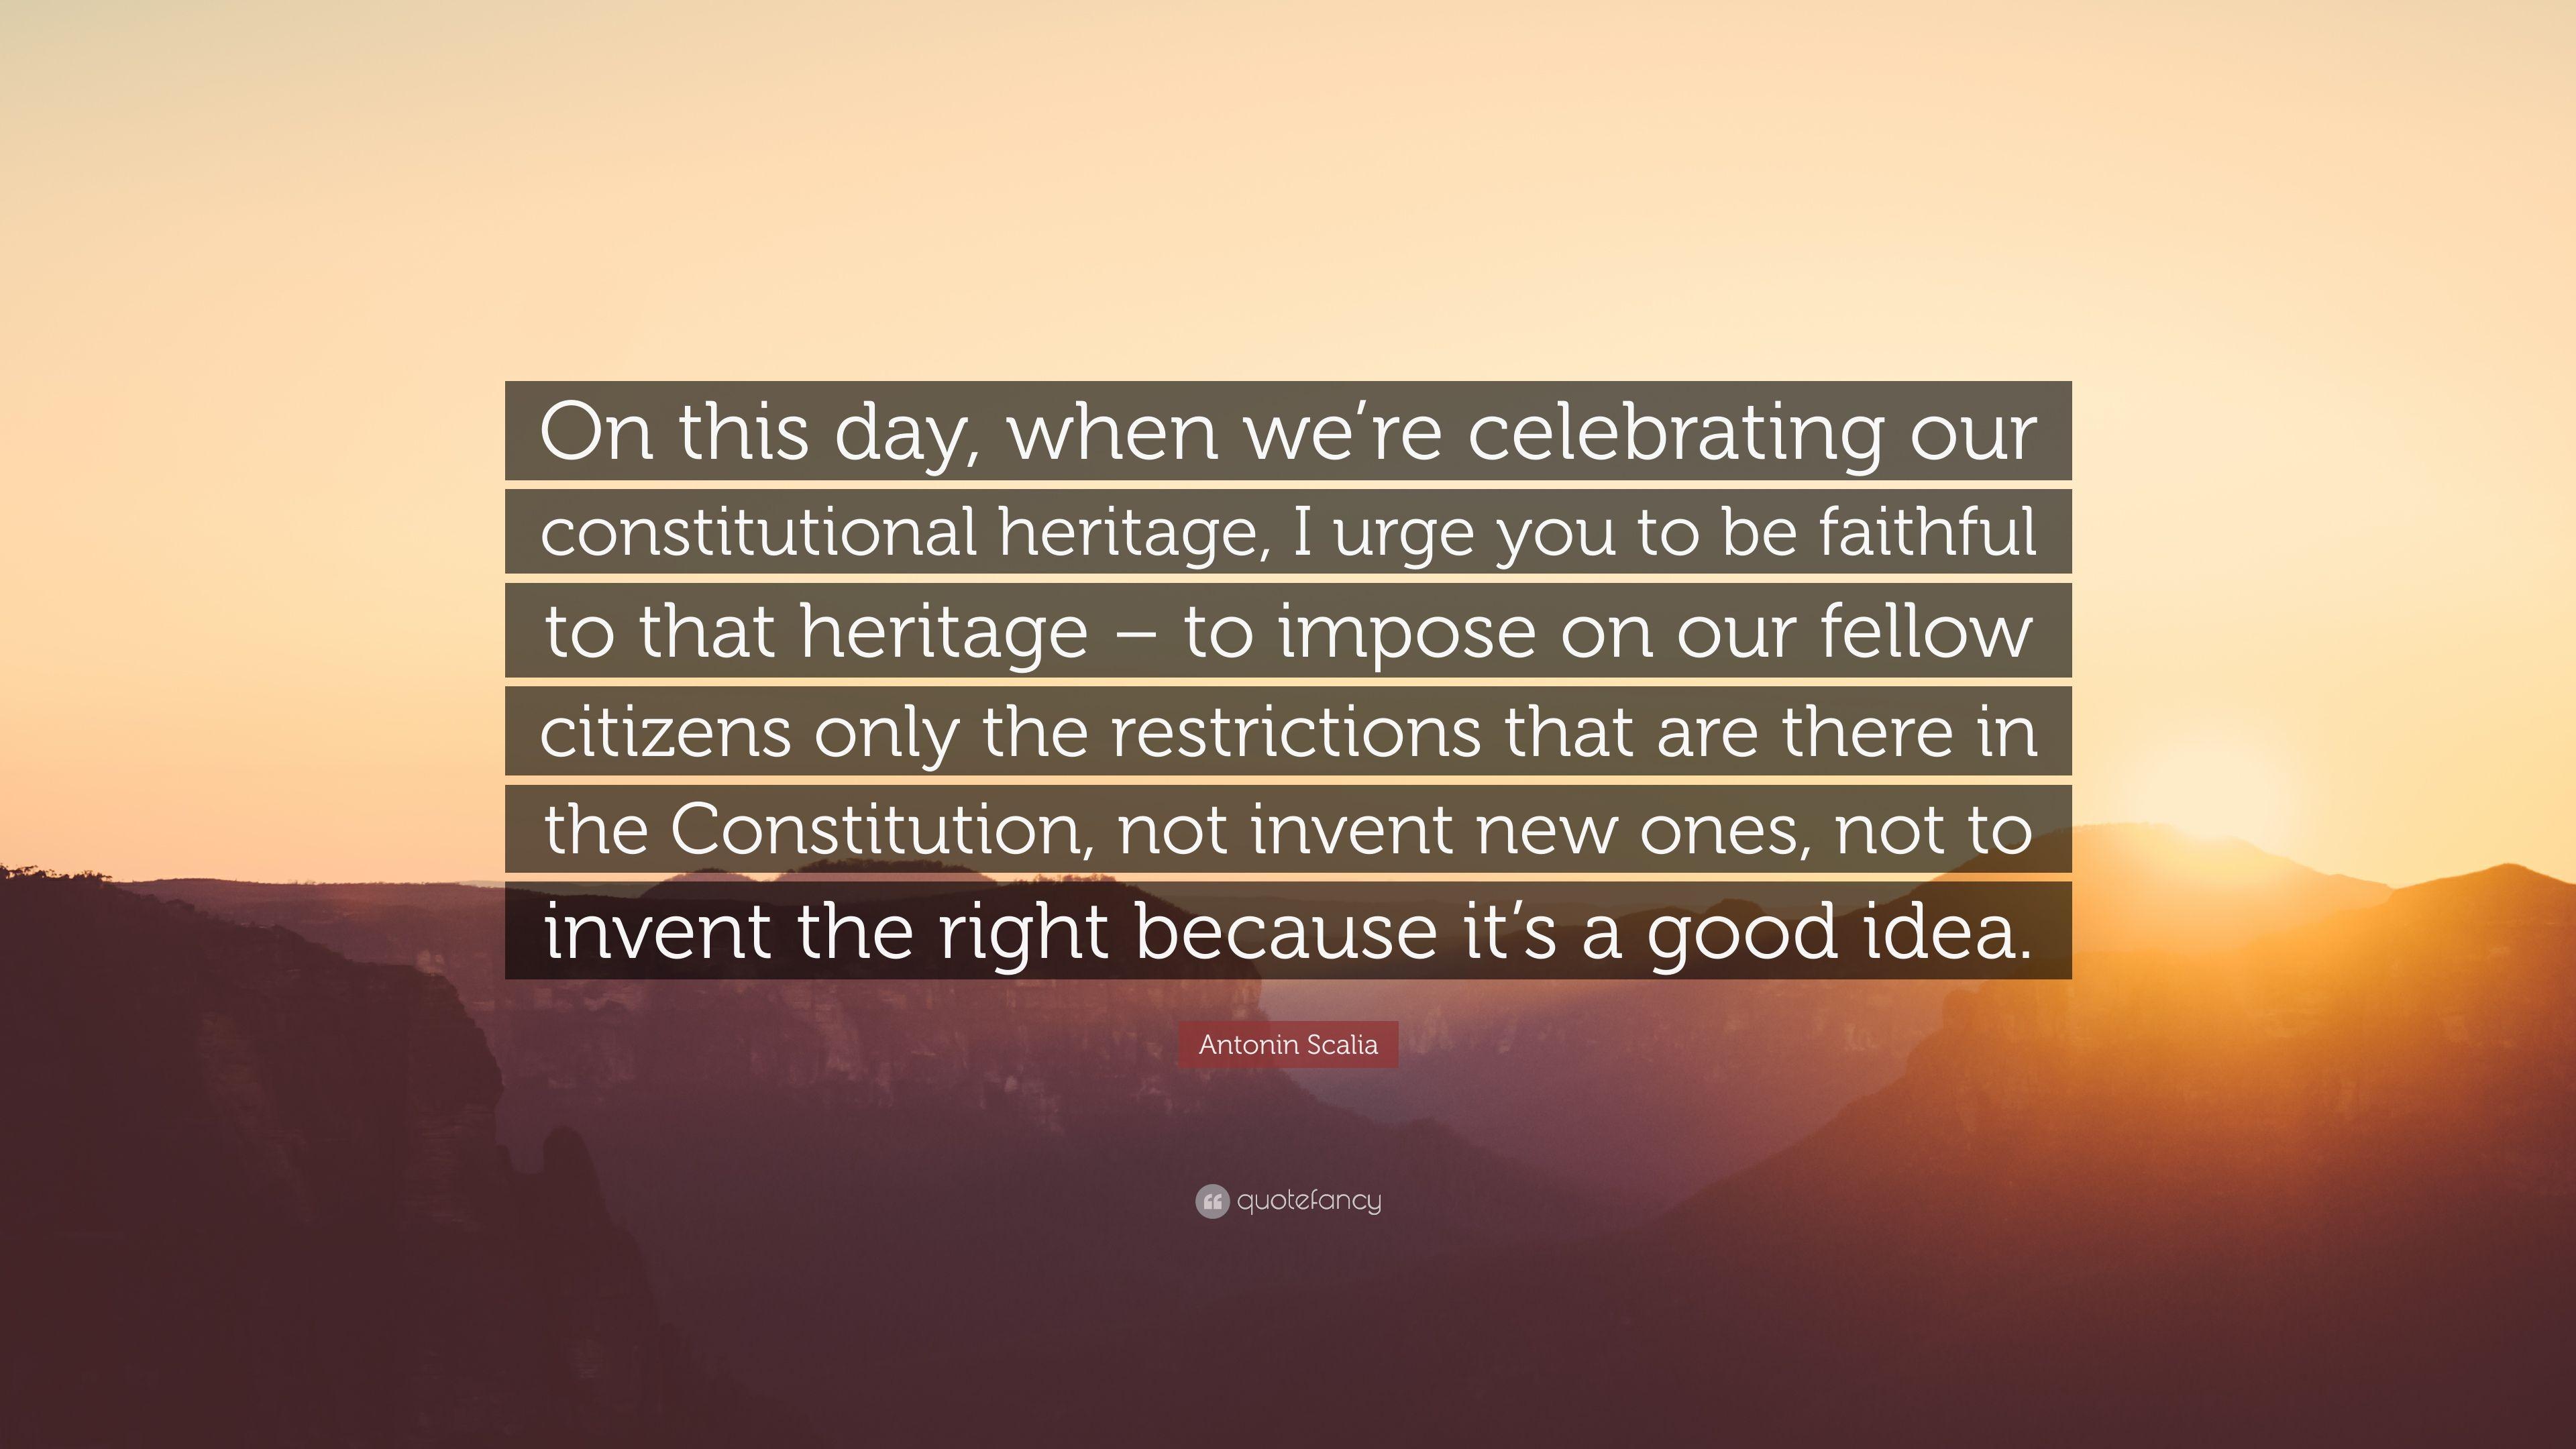 Antonin Scalia Quote: “On this day, when we're celebrating our